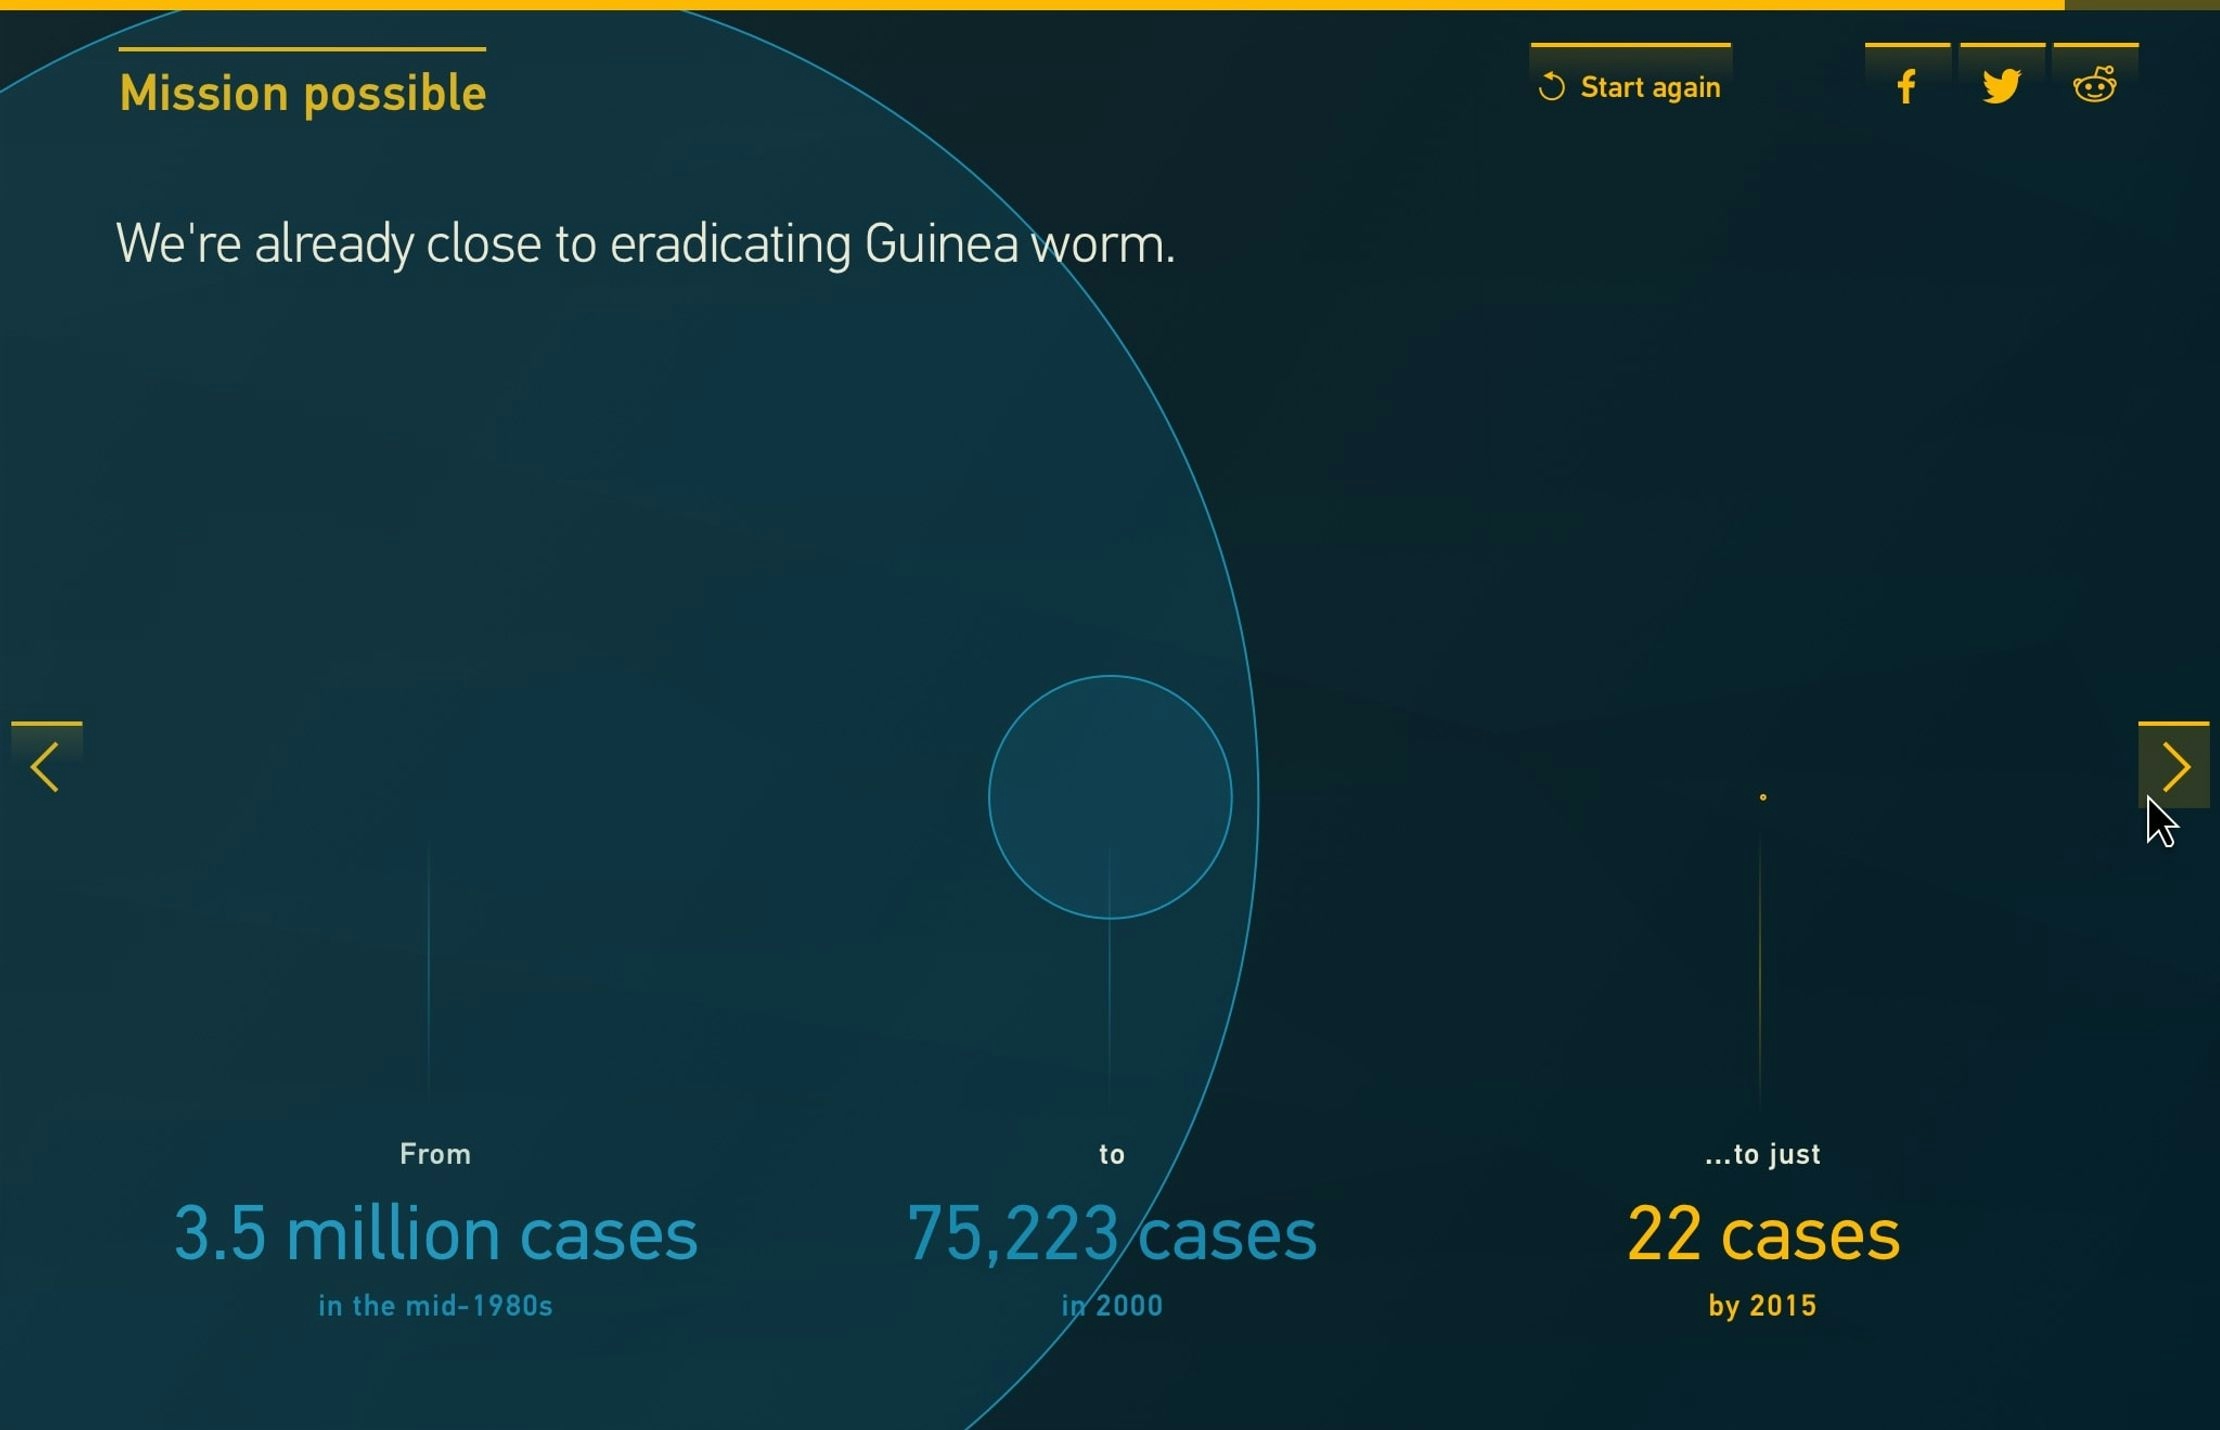 A proportional area chart showing cases of Guinea worm in different years. It shows we're close to eradicating Guinea worm with only 22 cases in 2015 compared to 3.5 million cases in the mid 1980s.